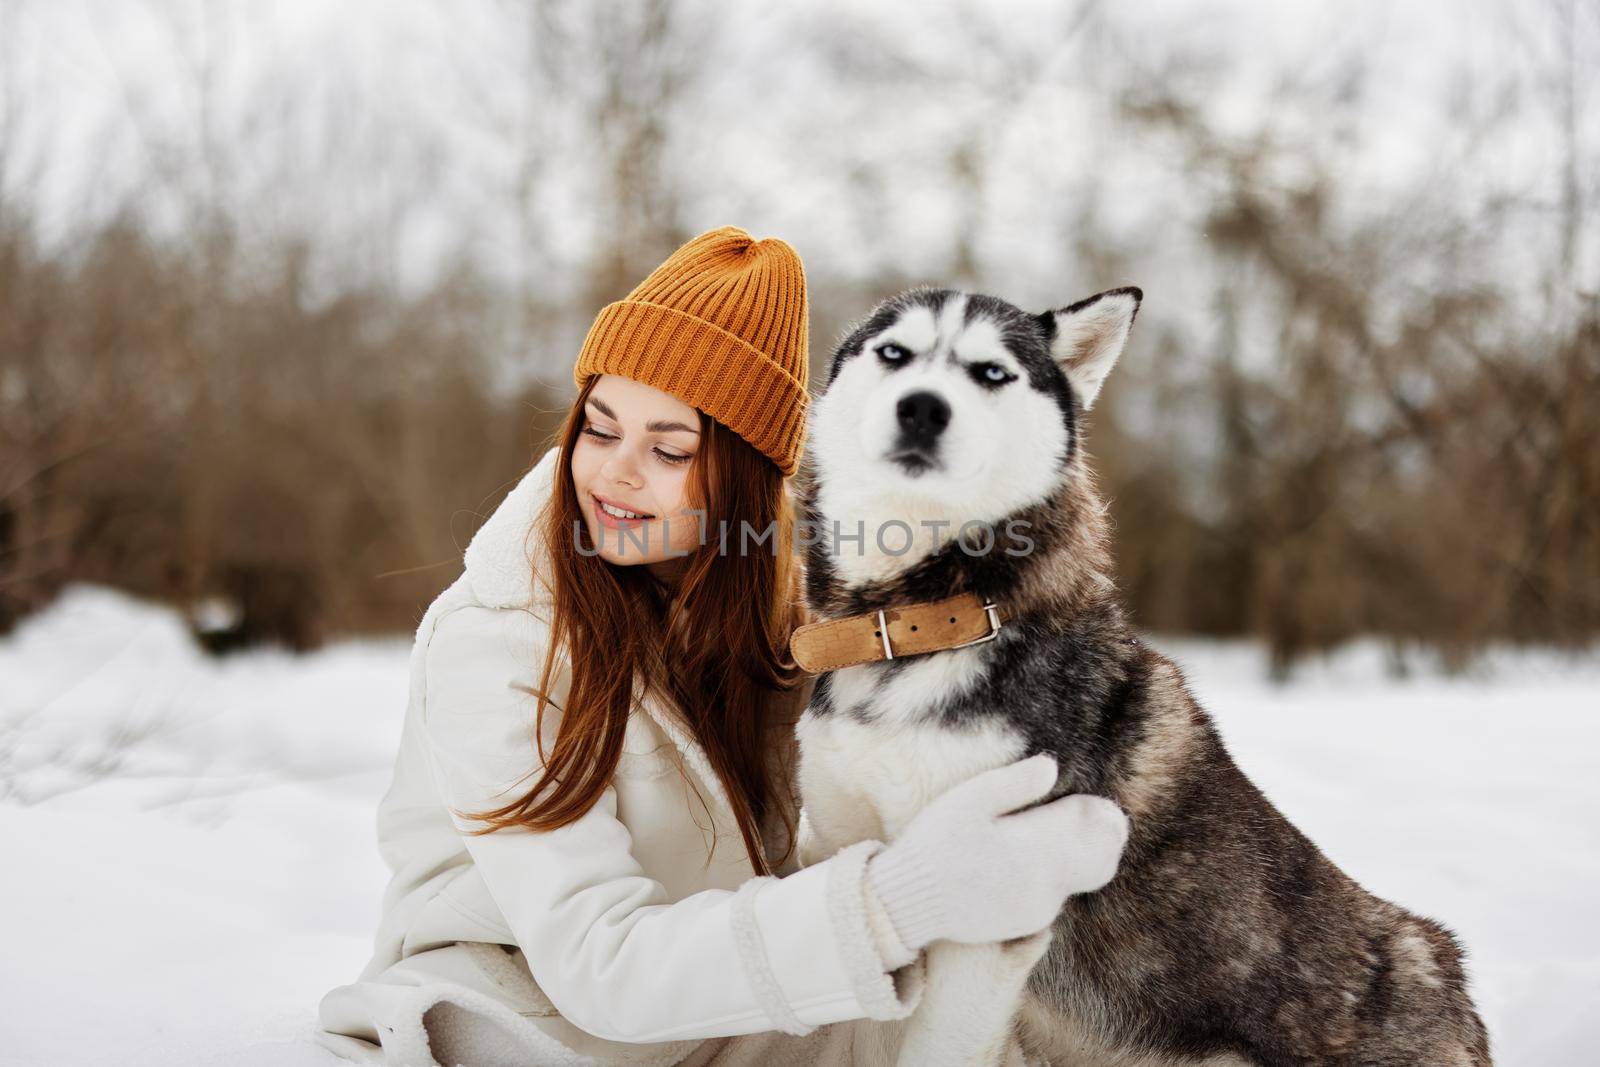 cheerful woman outdoors in a field in winter walking with a dog fresh air by SHOTPRIME